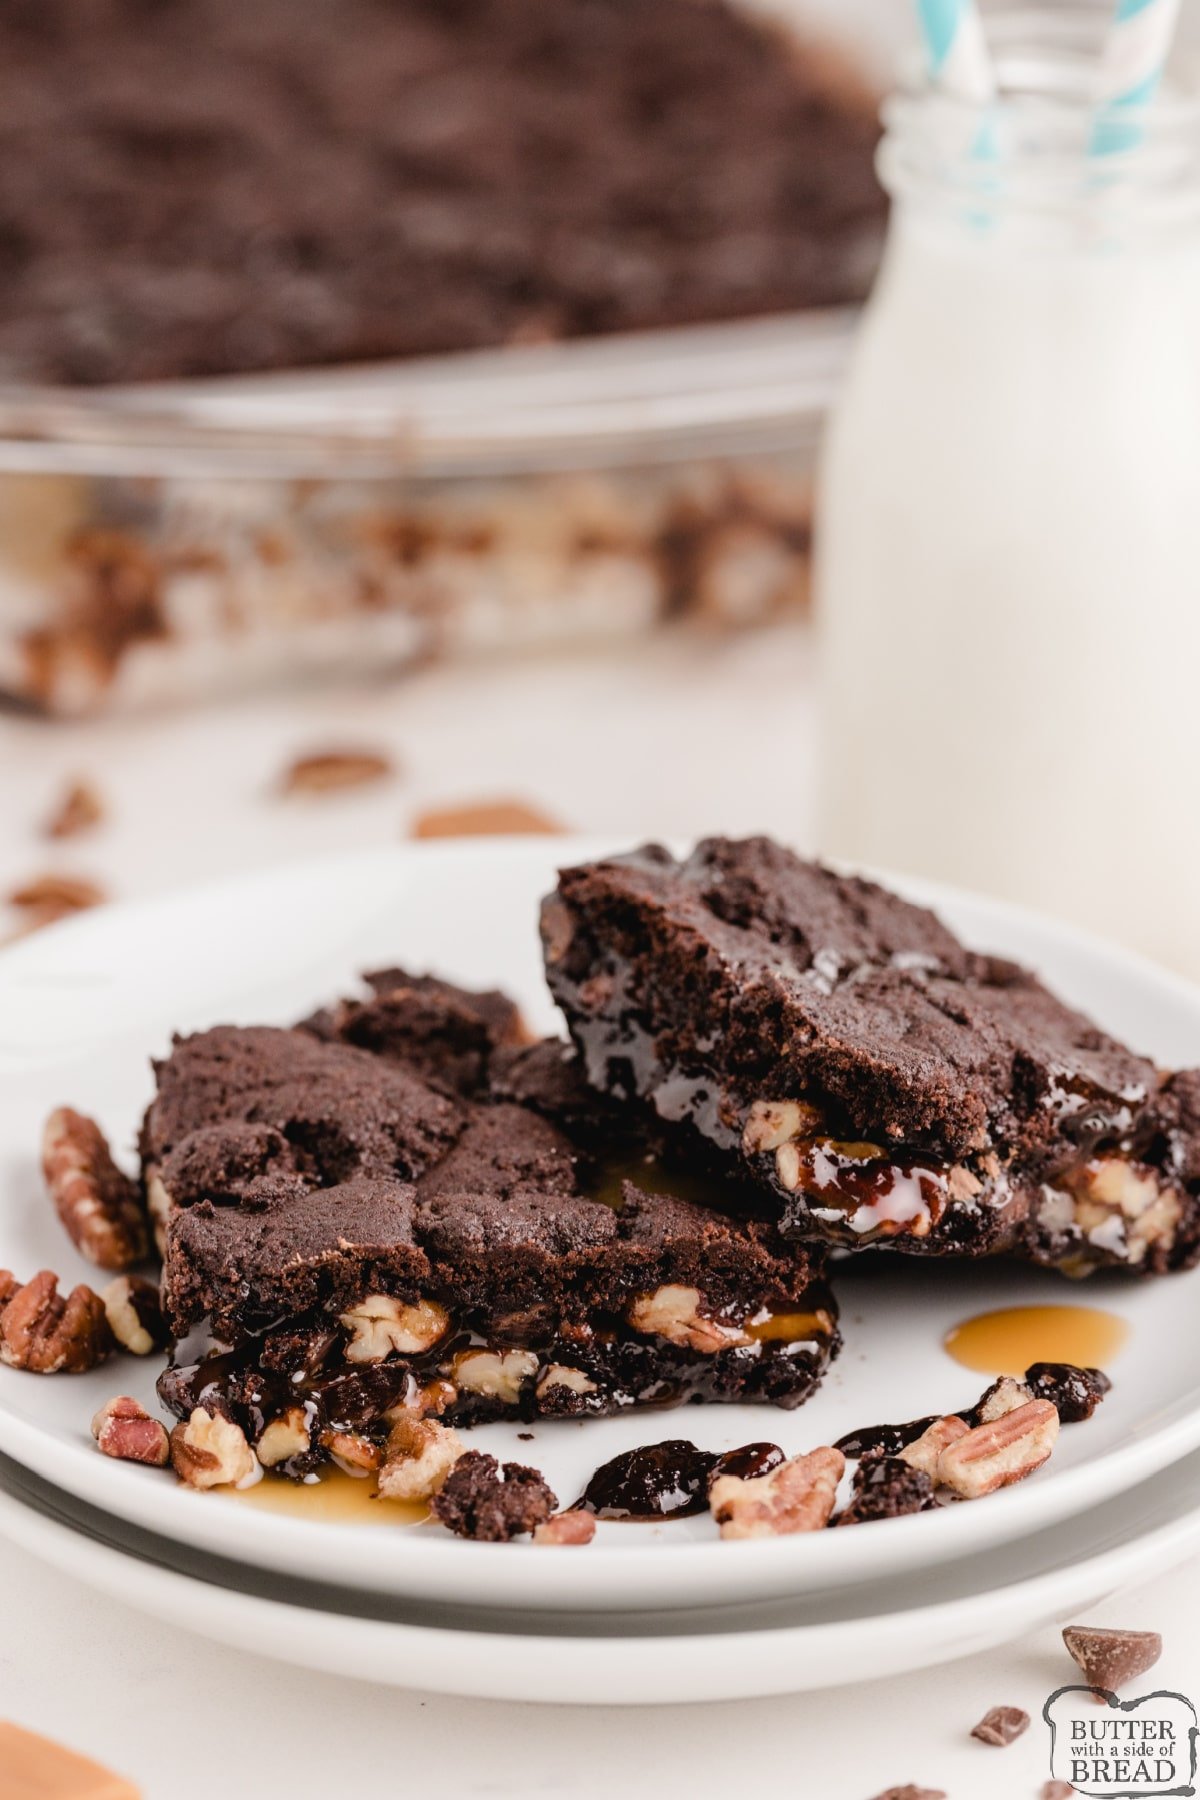 Cookie bars made with chocolate, caramel and pecans